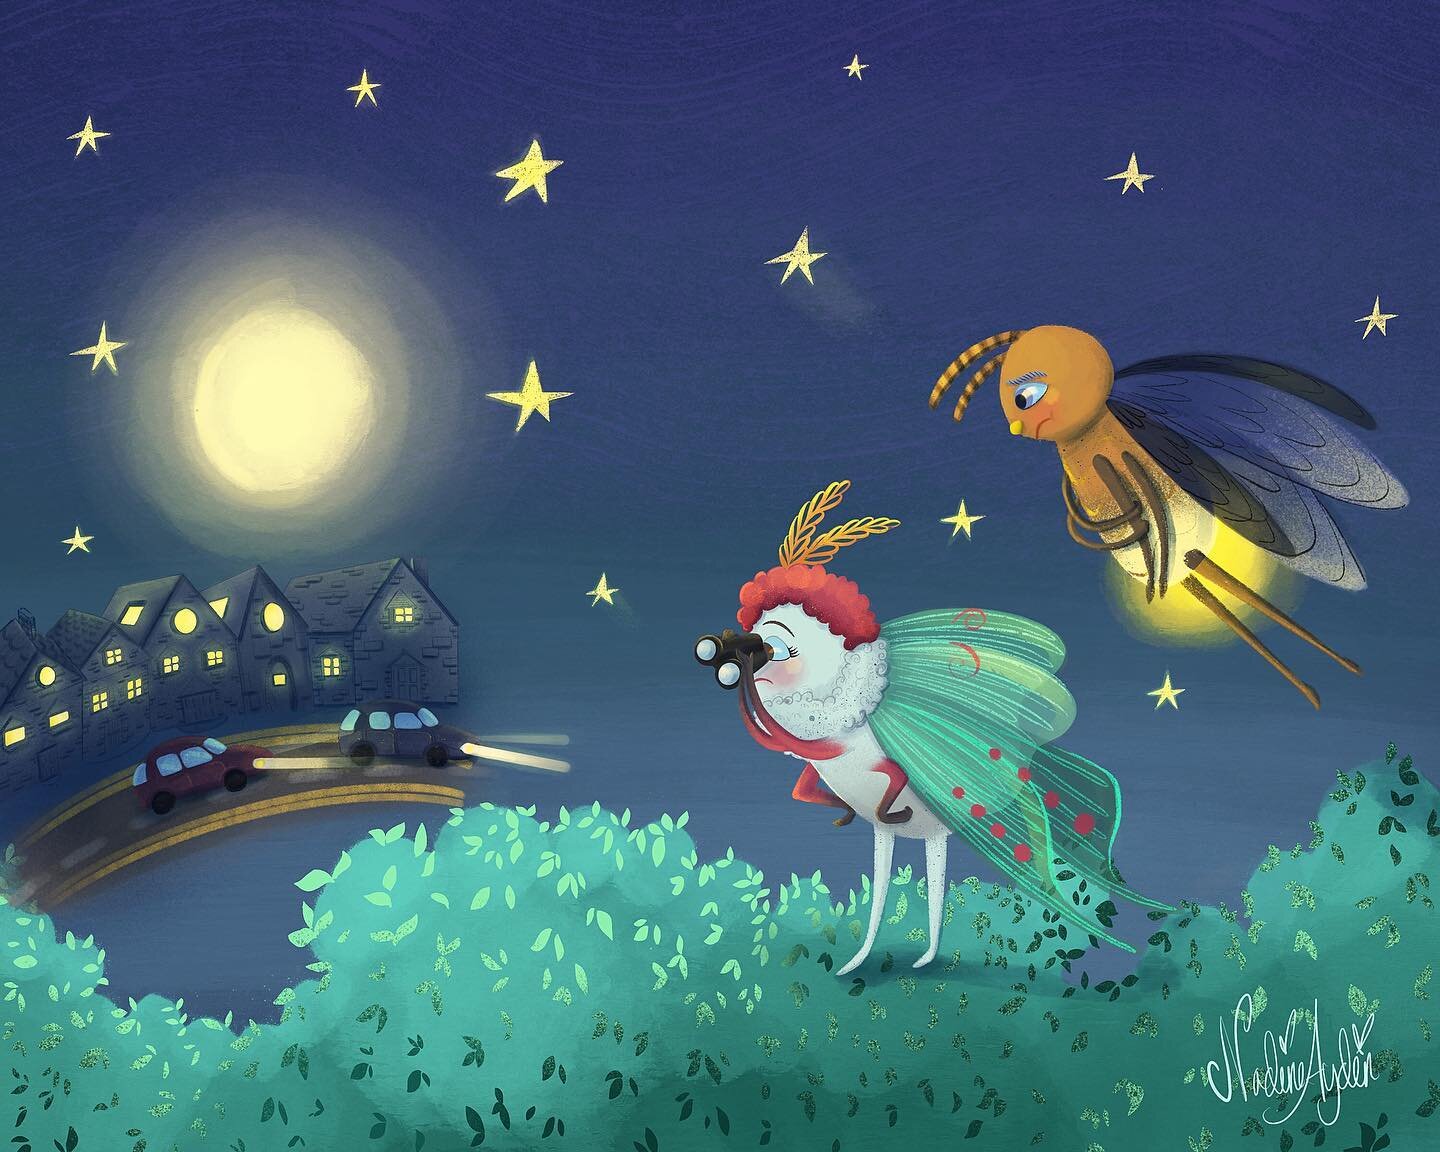 Which image is your favourite 1,2 or 3?
🦋 
Luna the moth is helping Lampy the firefly find his mum but it&rsquo;s such a confusing world out there for Lampy to find his mum because he is getting confused with the lights of the cars and the lights of